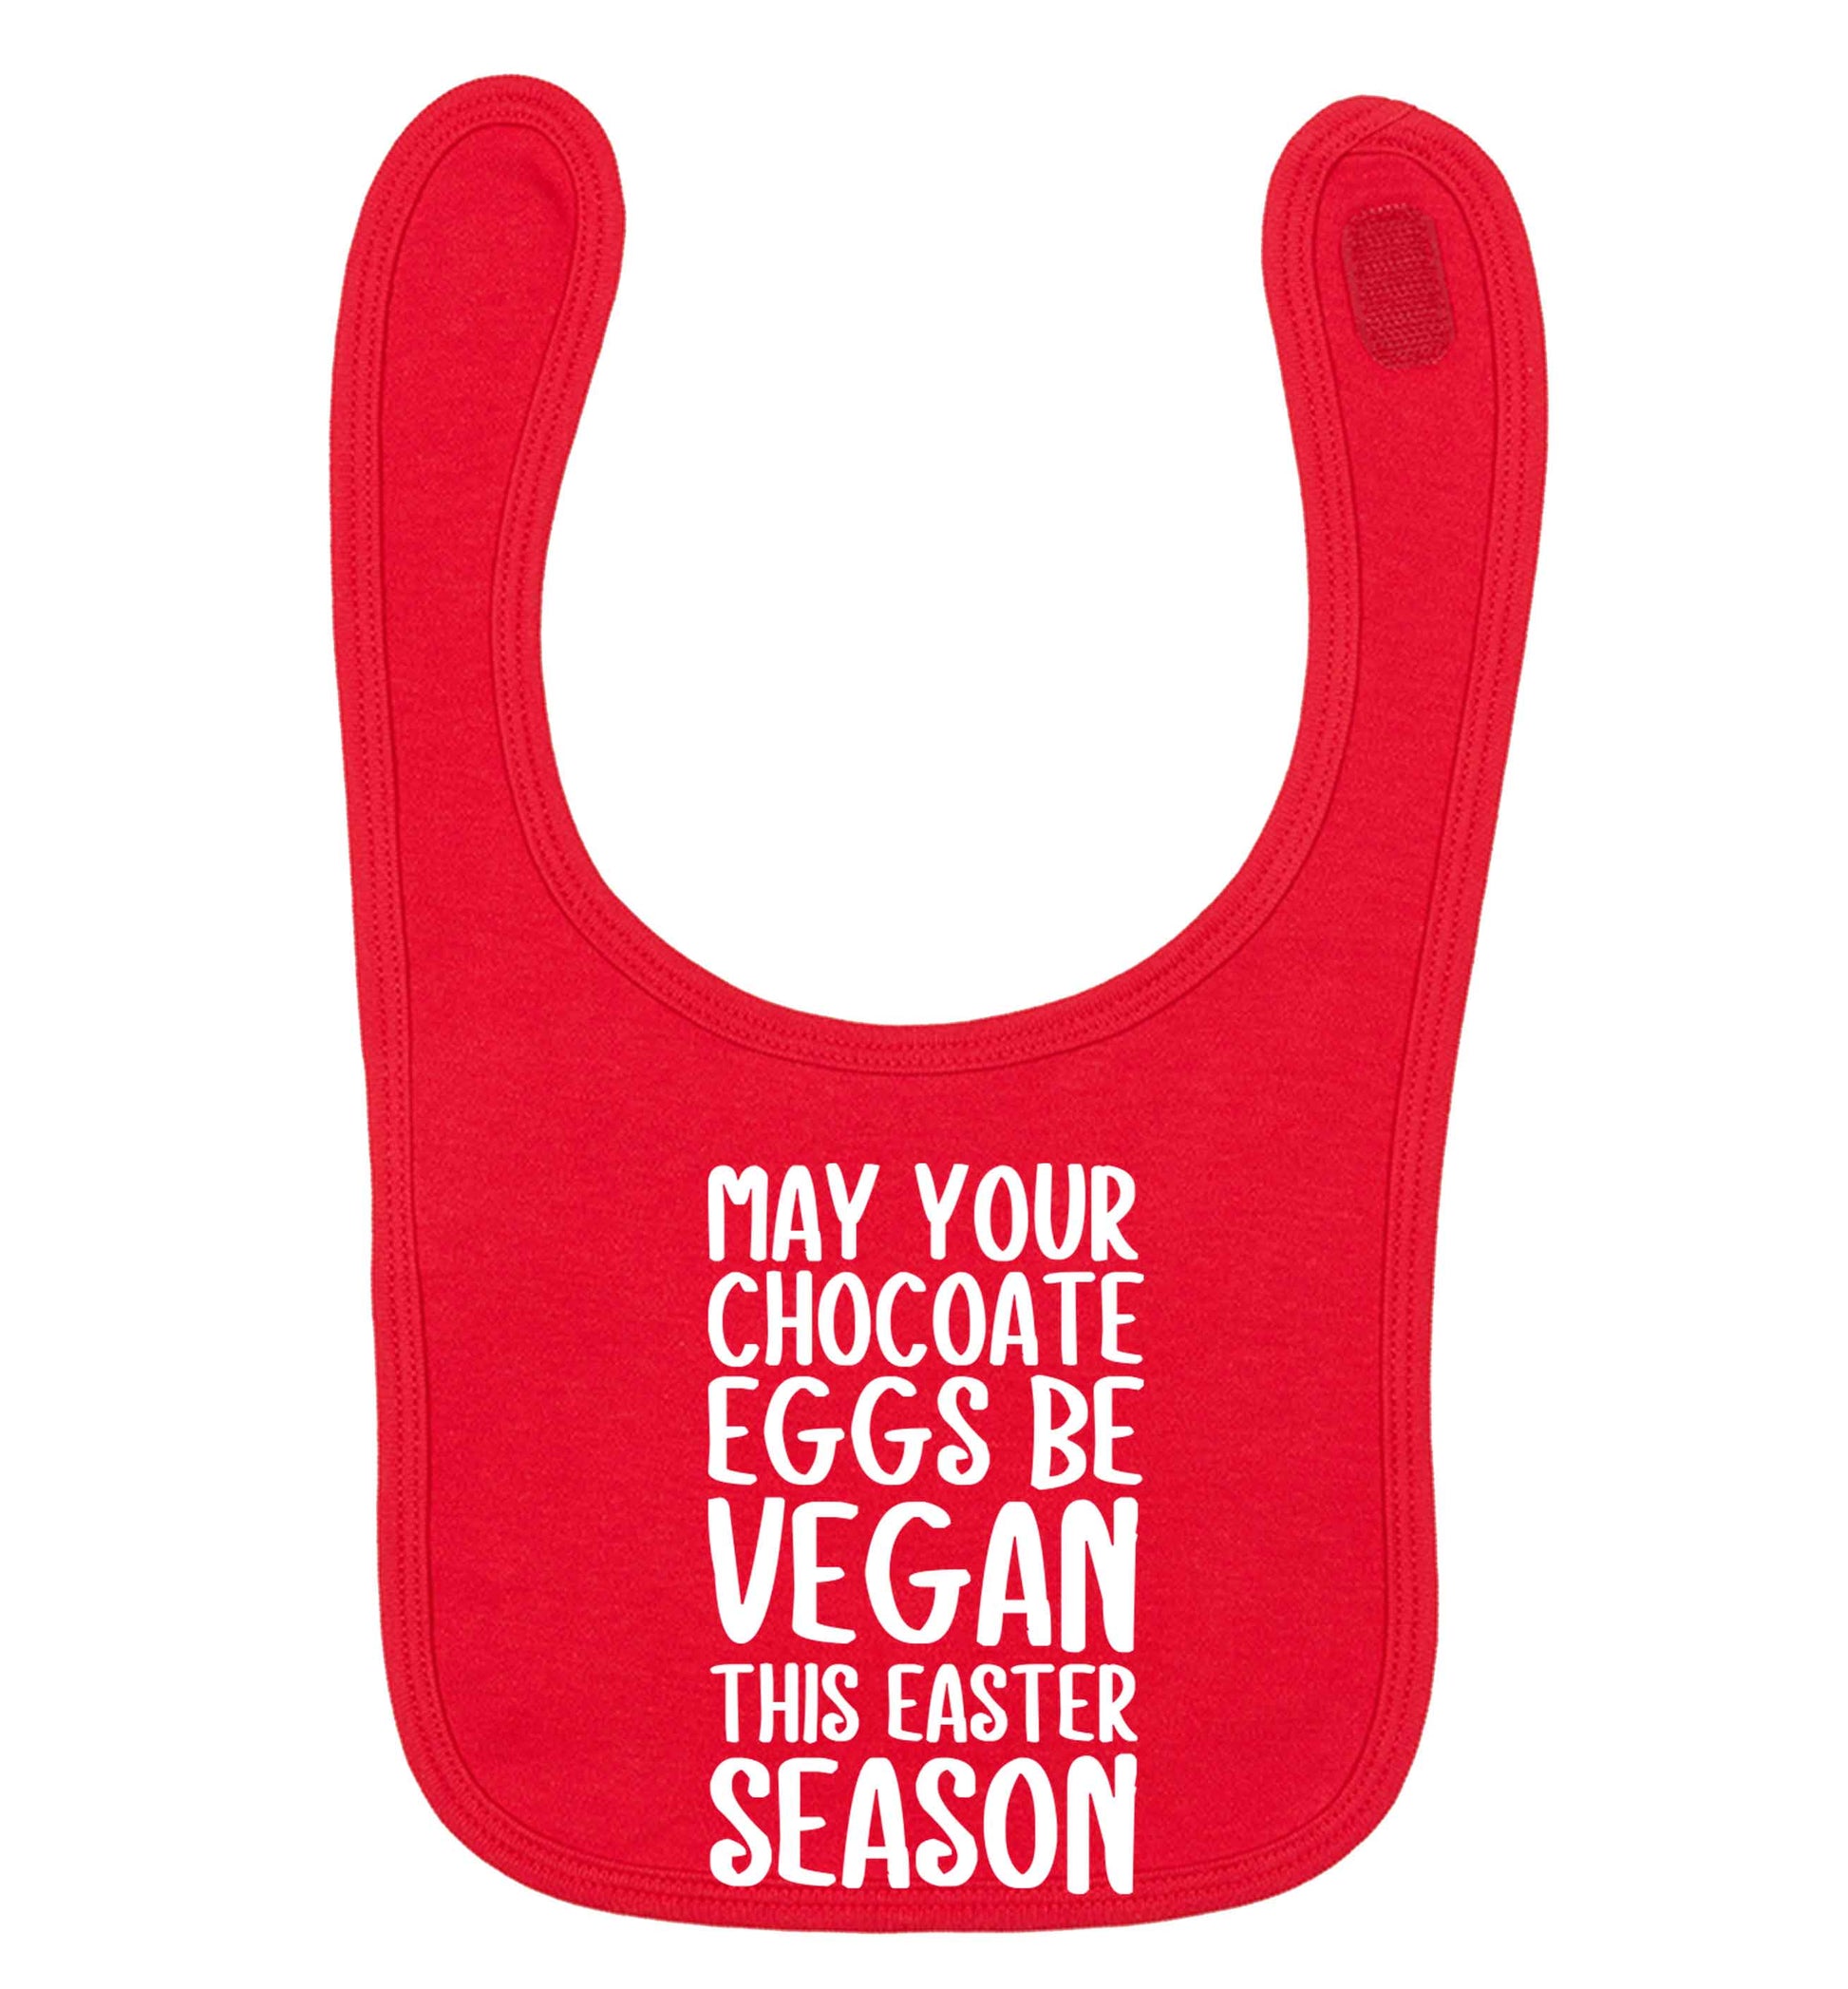 Easter bunny approved! Vegans will love this easter themed red baby bib